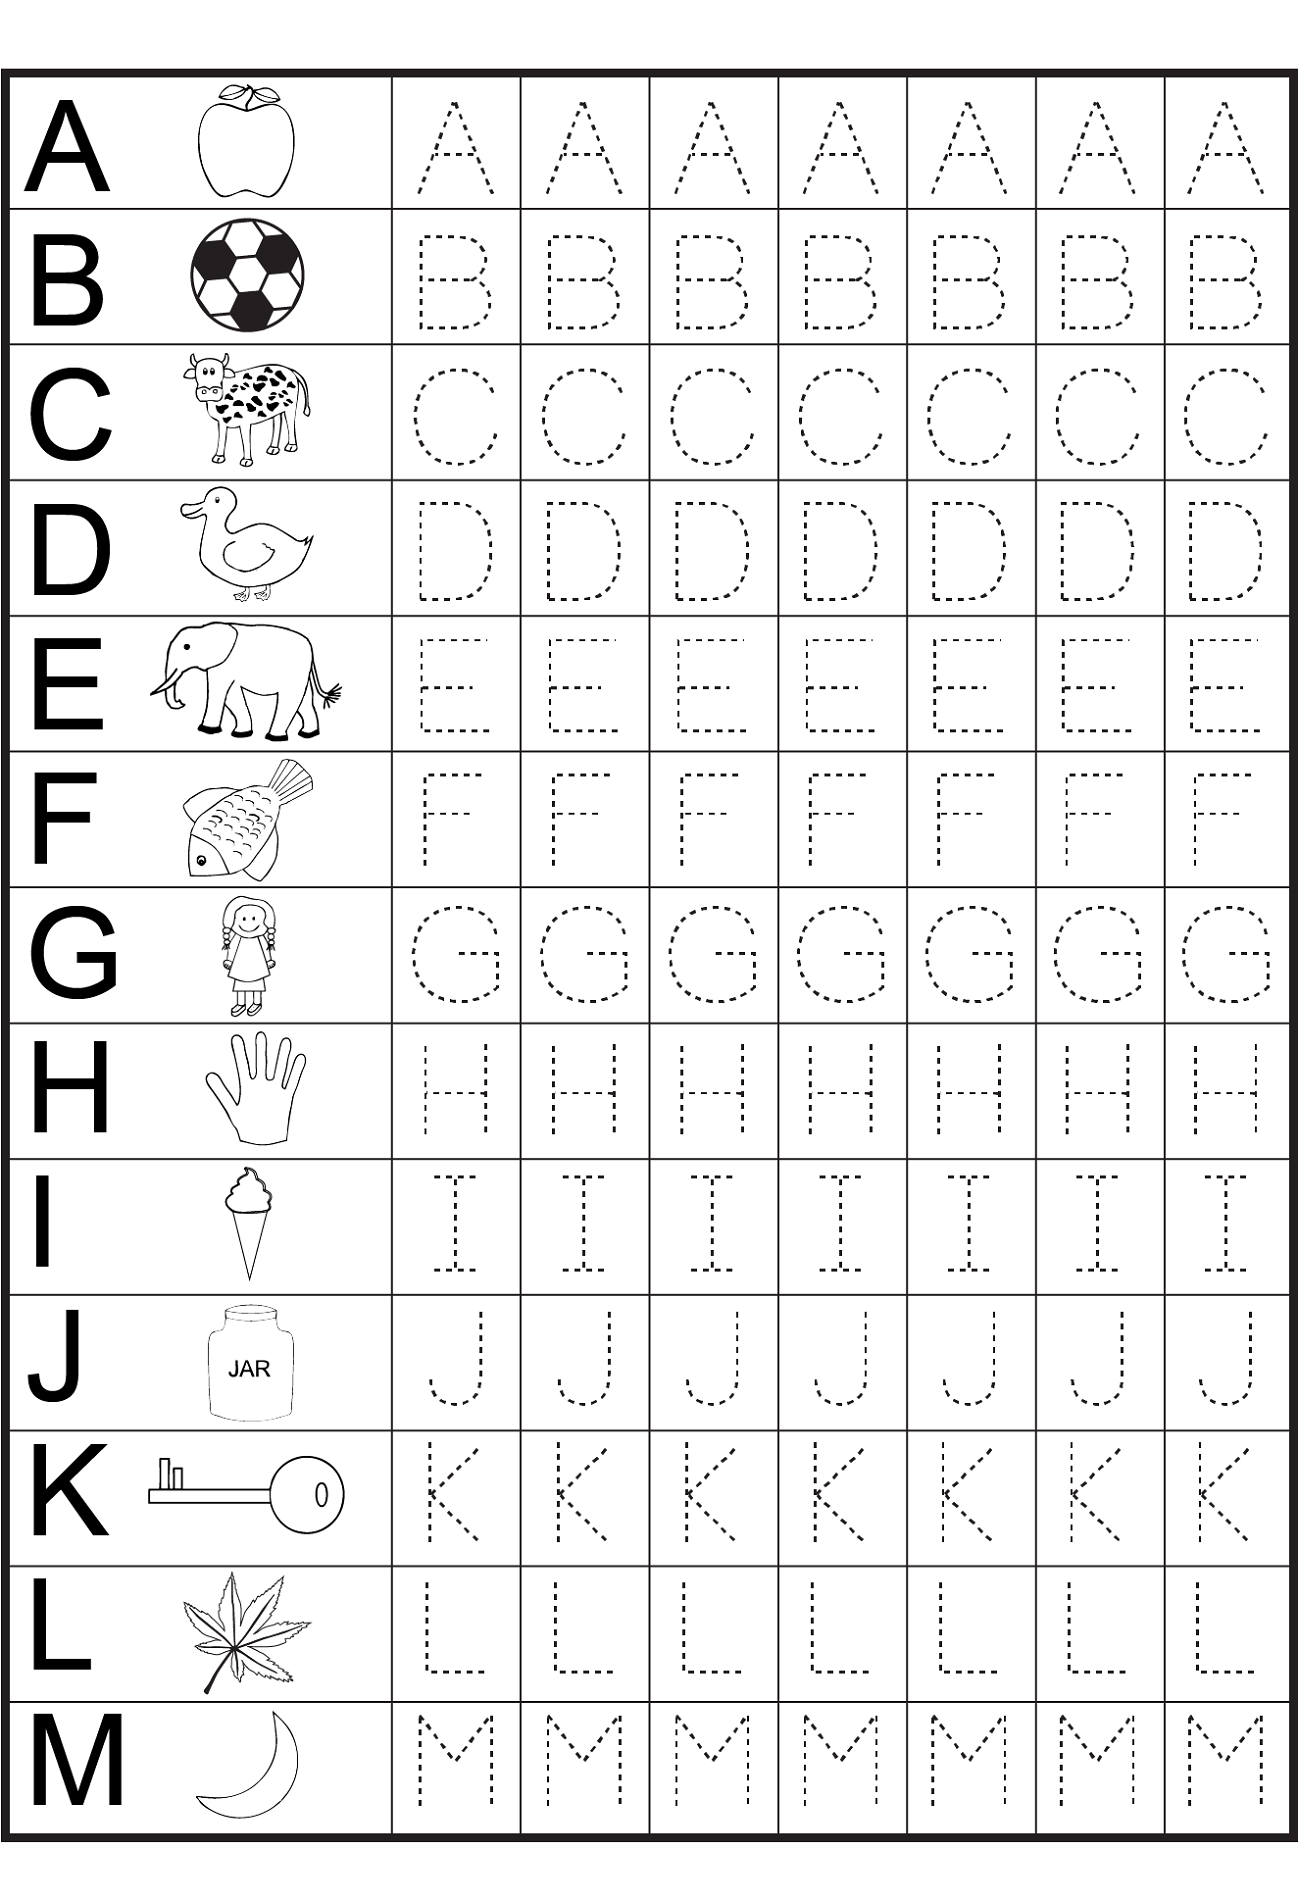 Printable ABC Traceable Worksheets | Activity Shelter